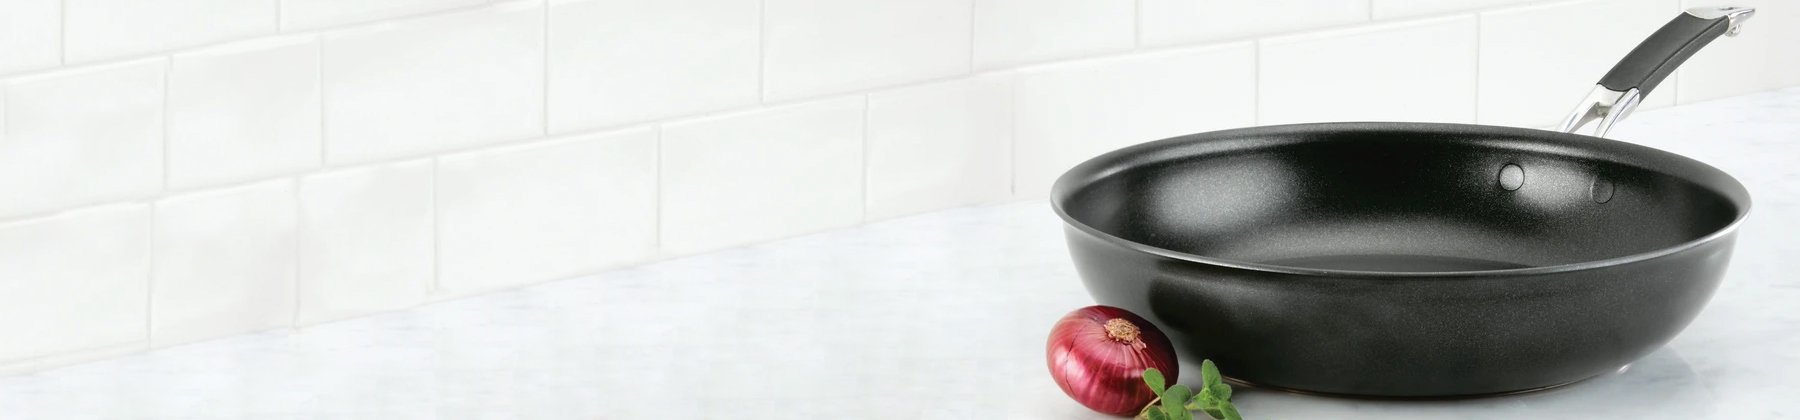 Photo of Anolon hard-anodized nonstick cookware pan.